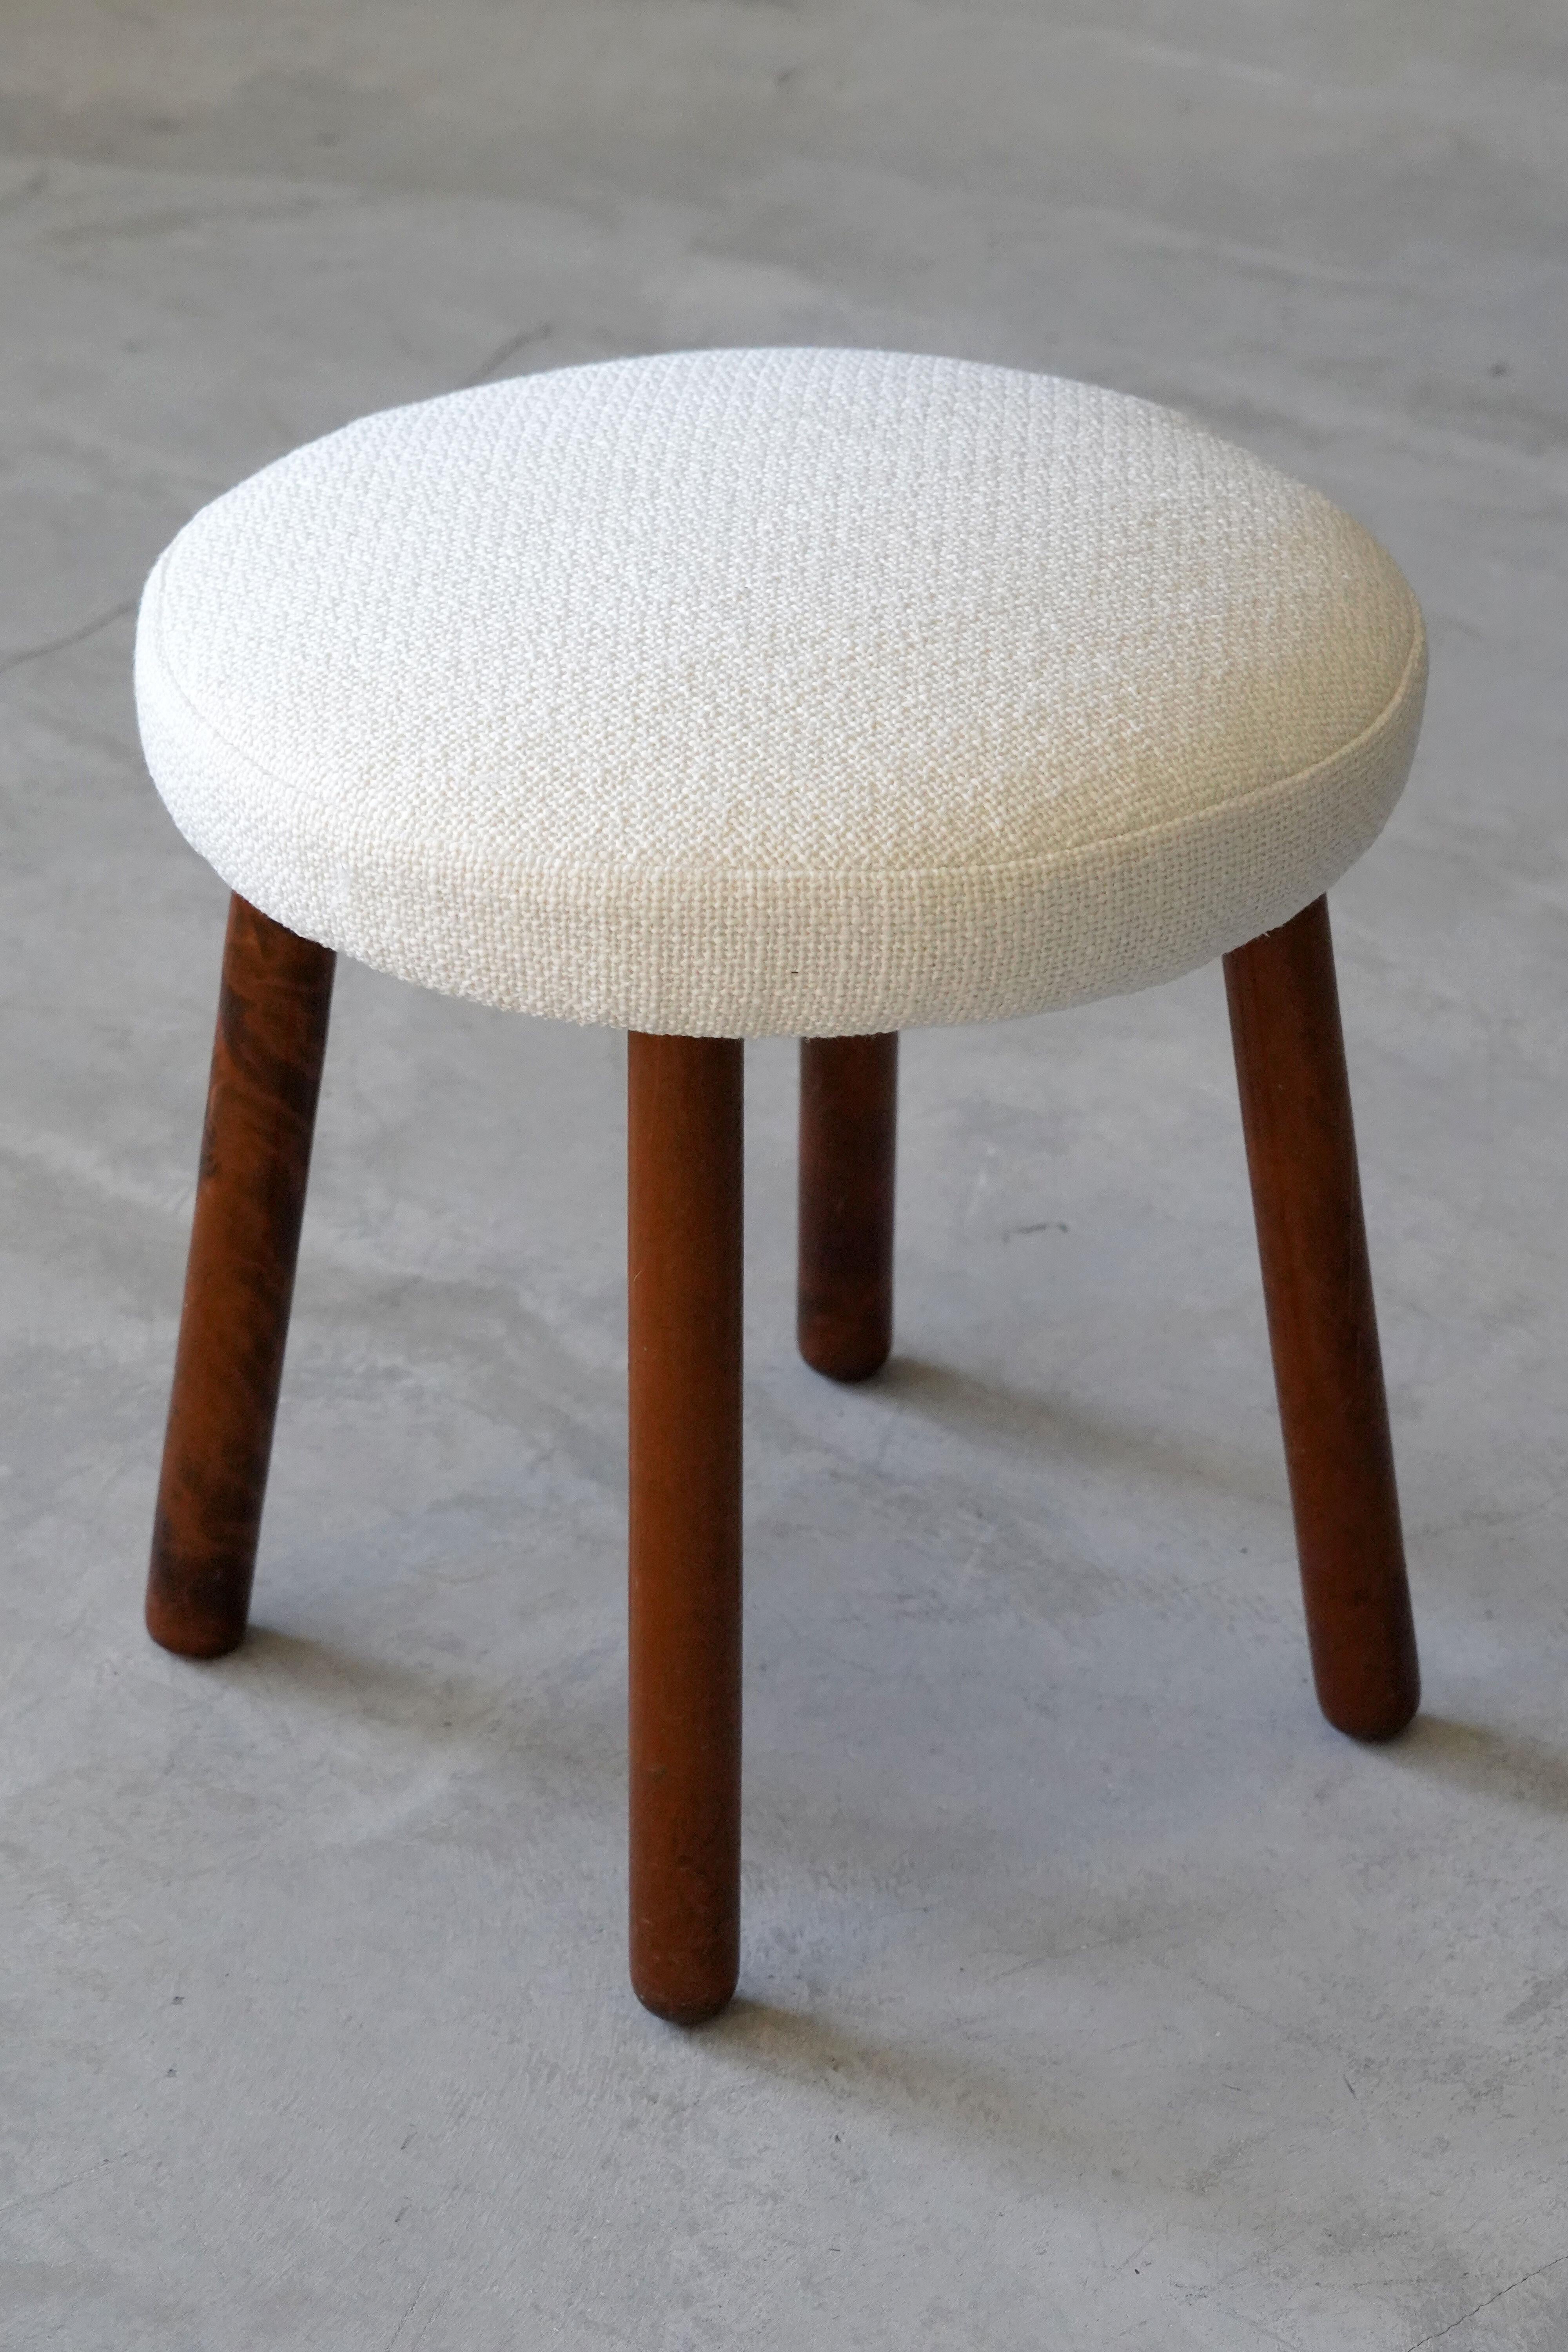 A stool, produced by Georg Kofoed. With dark-stained wooden legs. Reupholstered in brand new white fabric. 

Other designers of the period include Philip Arctander, Arnold Madsen, Josef Frank, Viggo Boesen and Jean Royere.